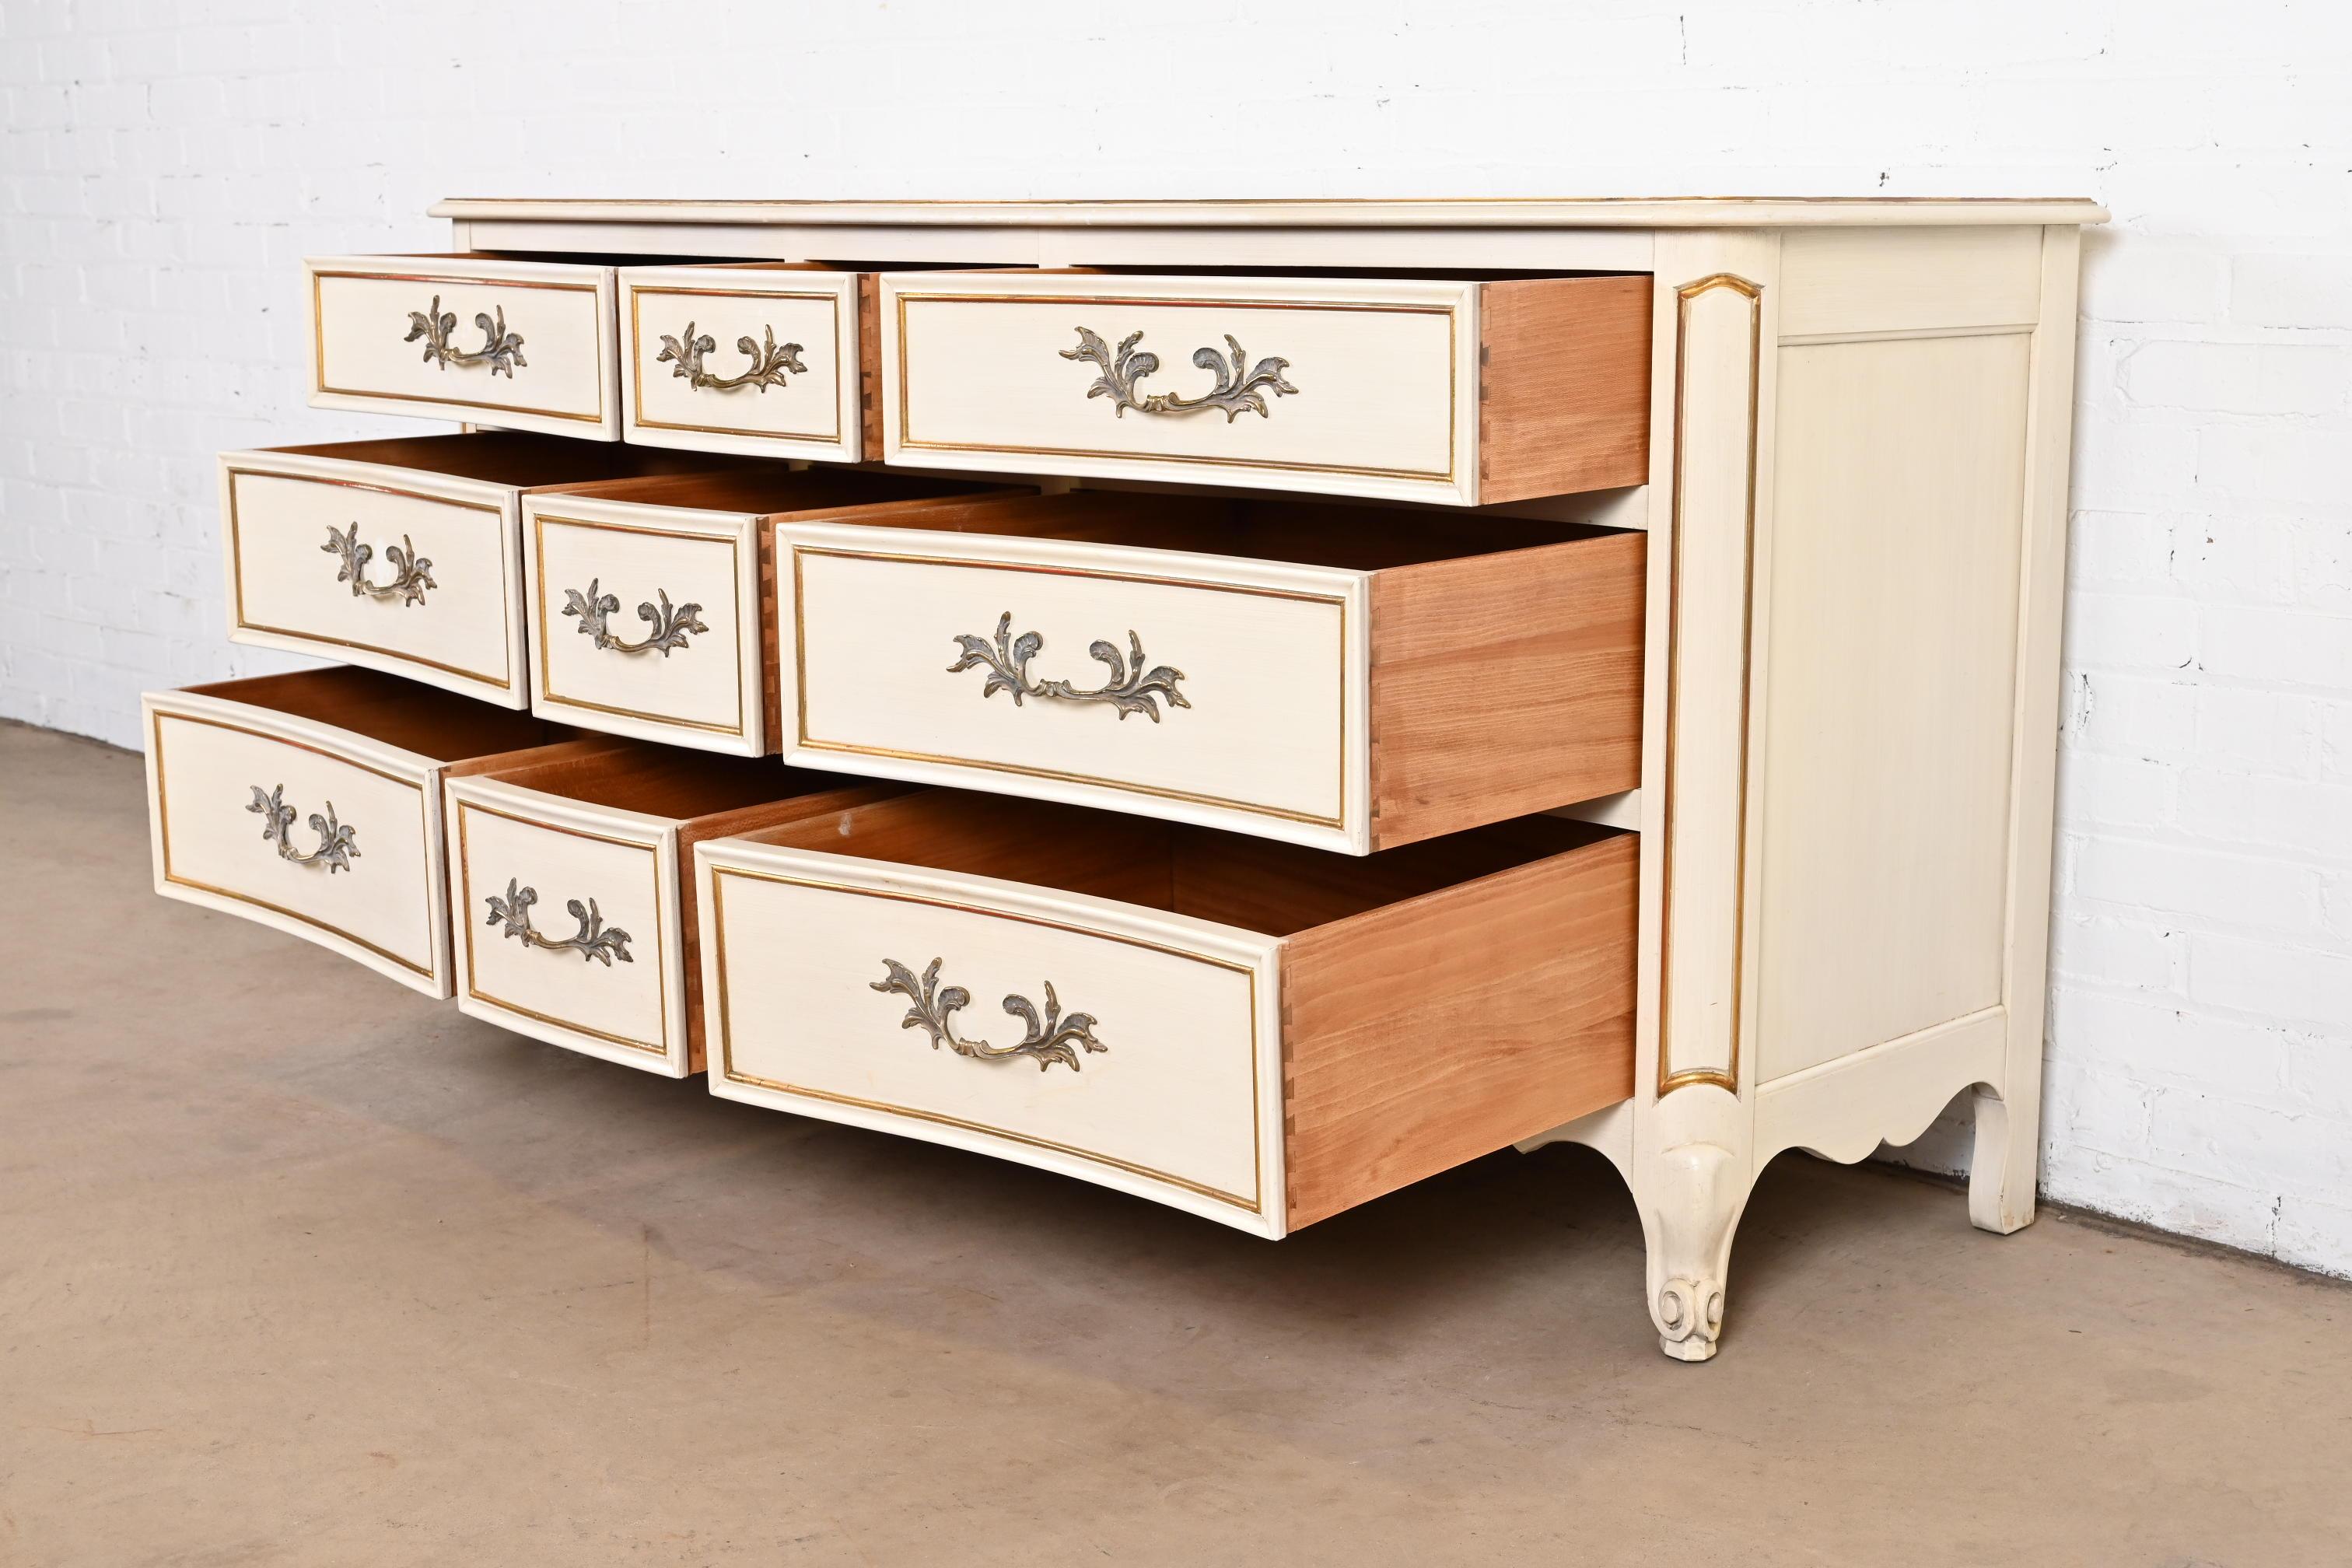 Kindel Furniture French Provincial Louis XV Triple Dresser, circa 1960s For Sale 1